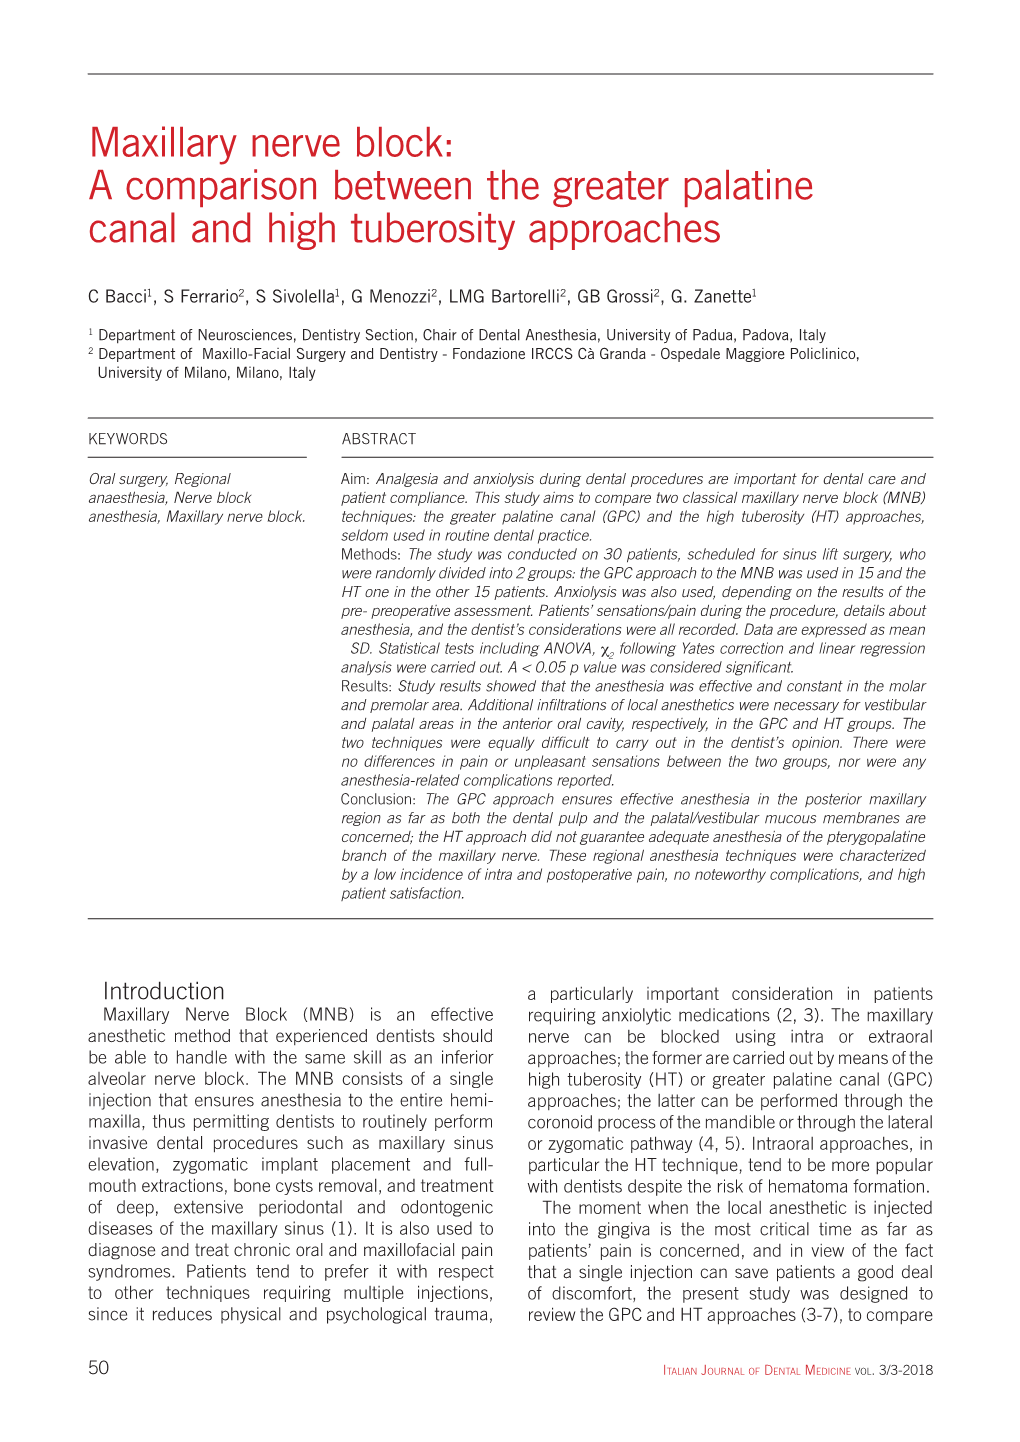 Maxillary Nerve Block: a Comparison Between the Greater Palatine Canal and High Tuberosity Approaches